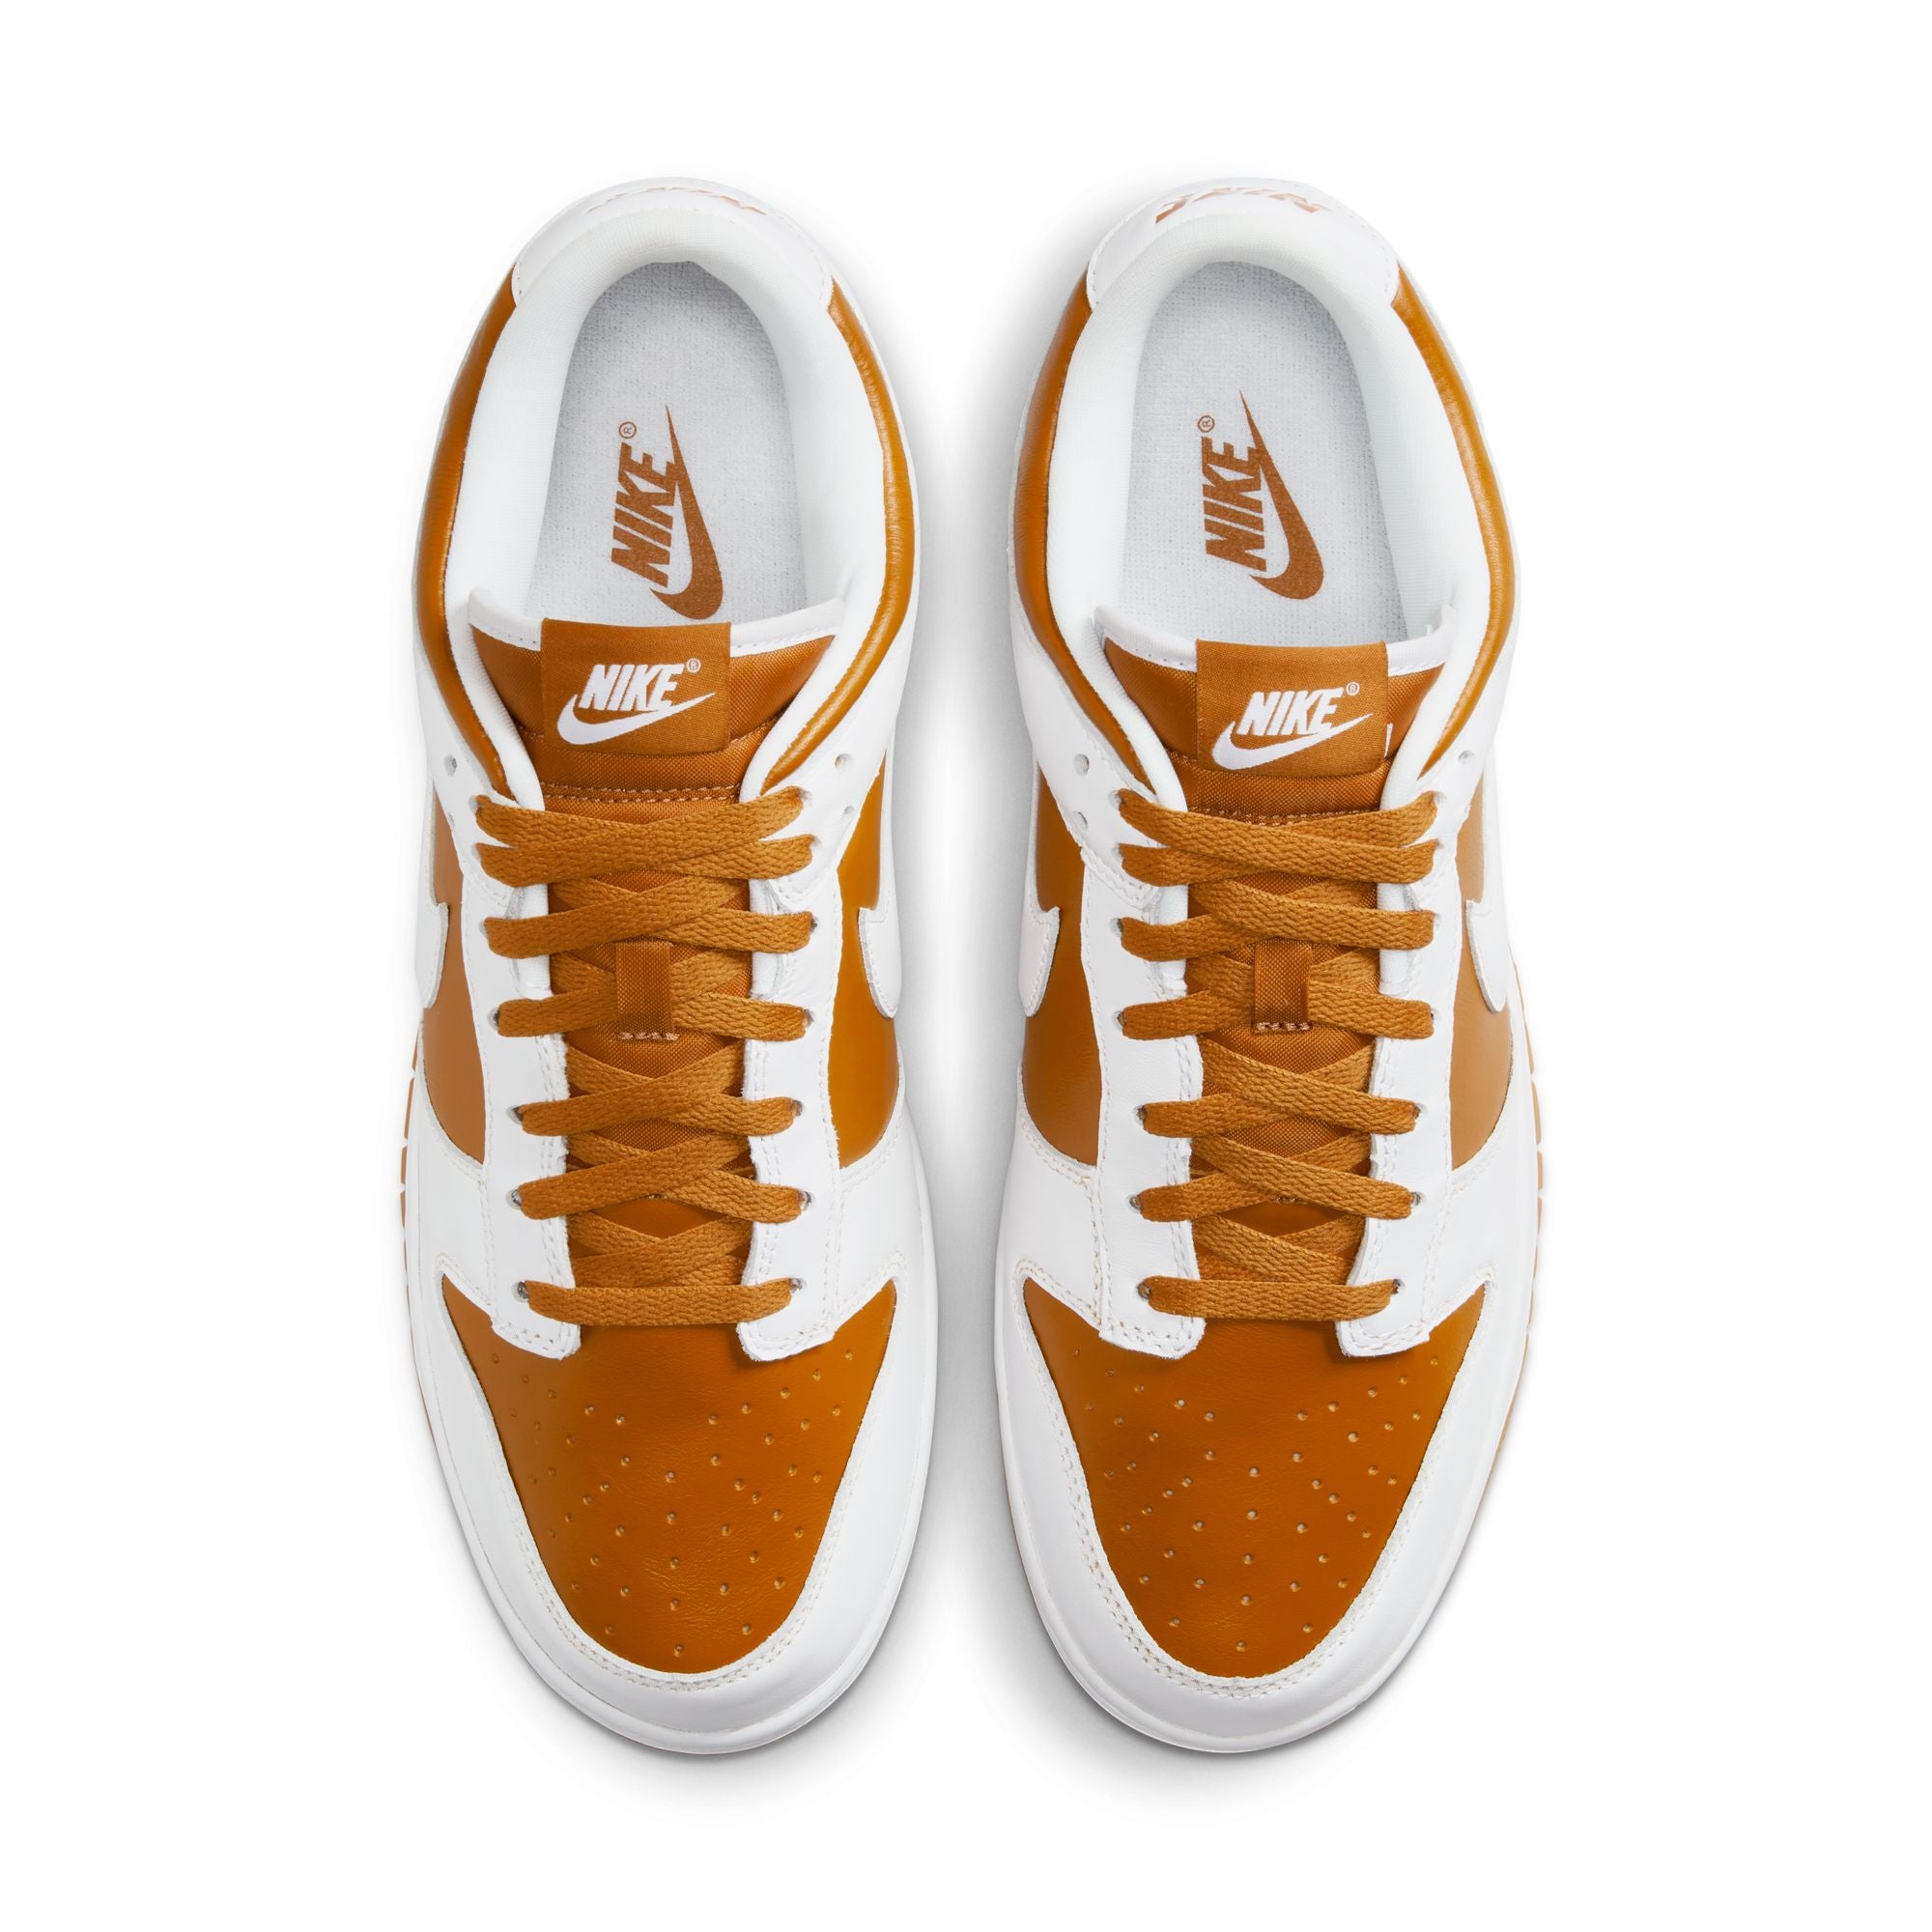 NIKE - Nike Dunk Low Qs - (Dk Curry/White) view 6